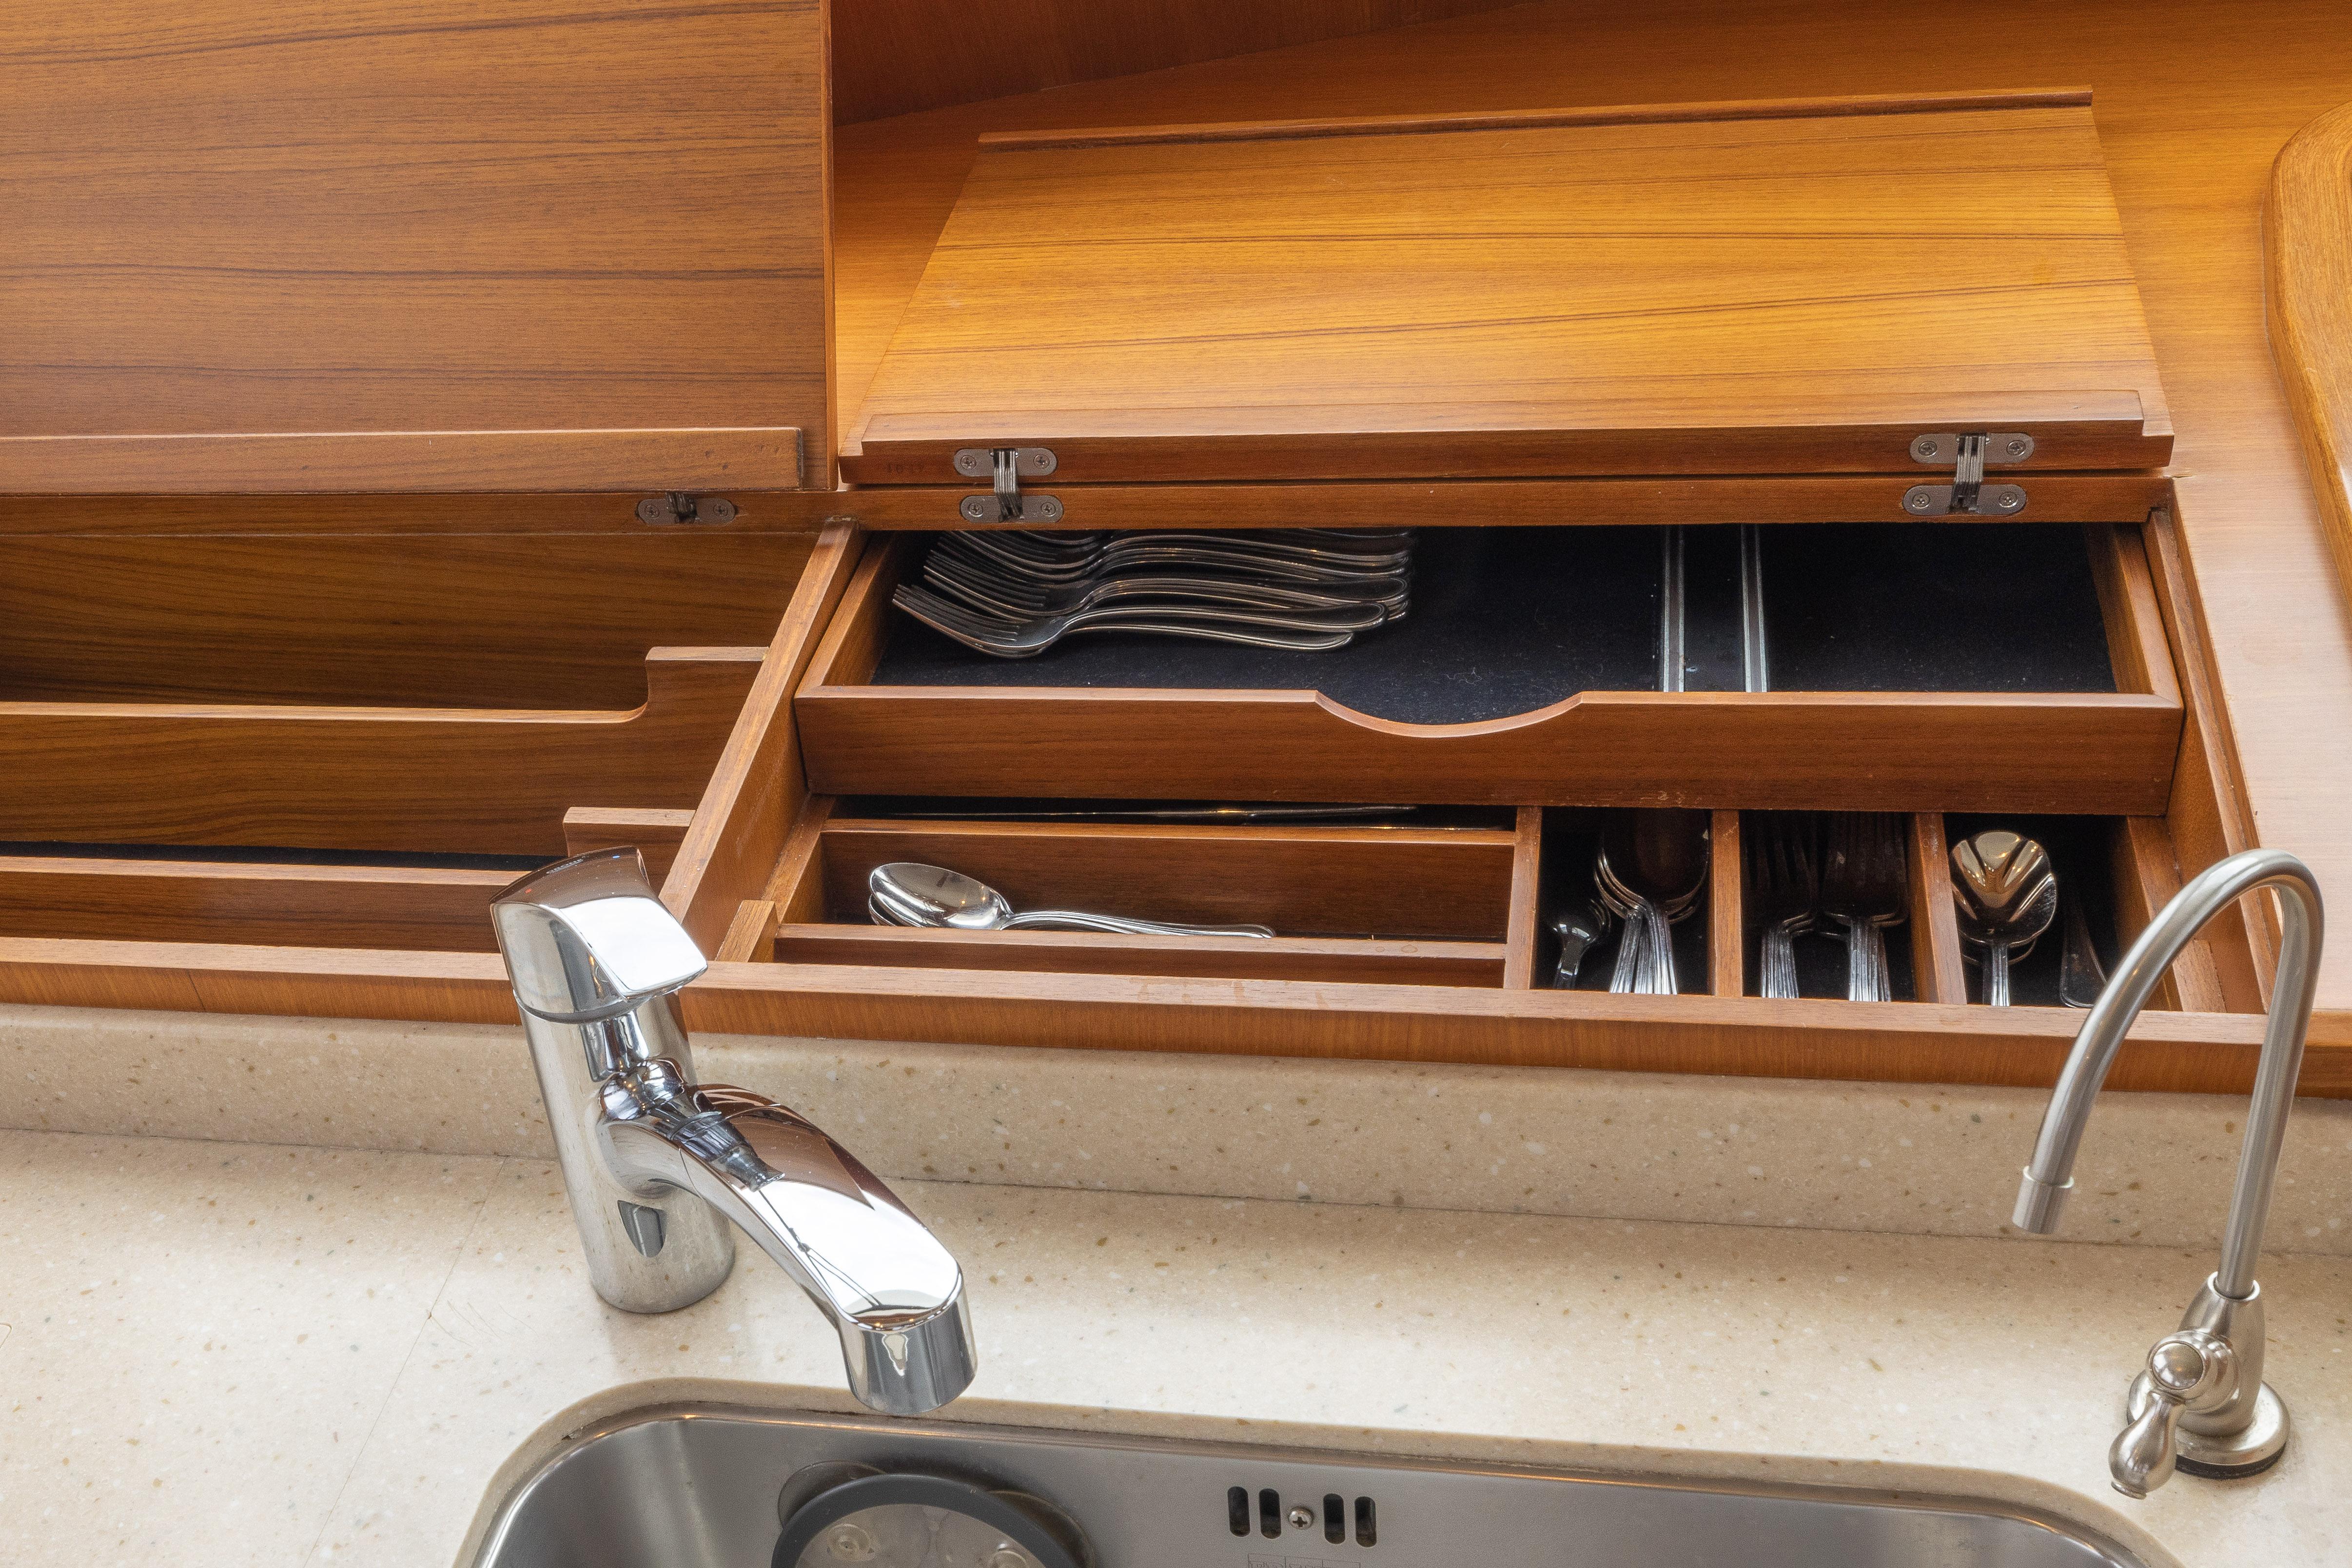 Lined Silverware Compartments